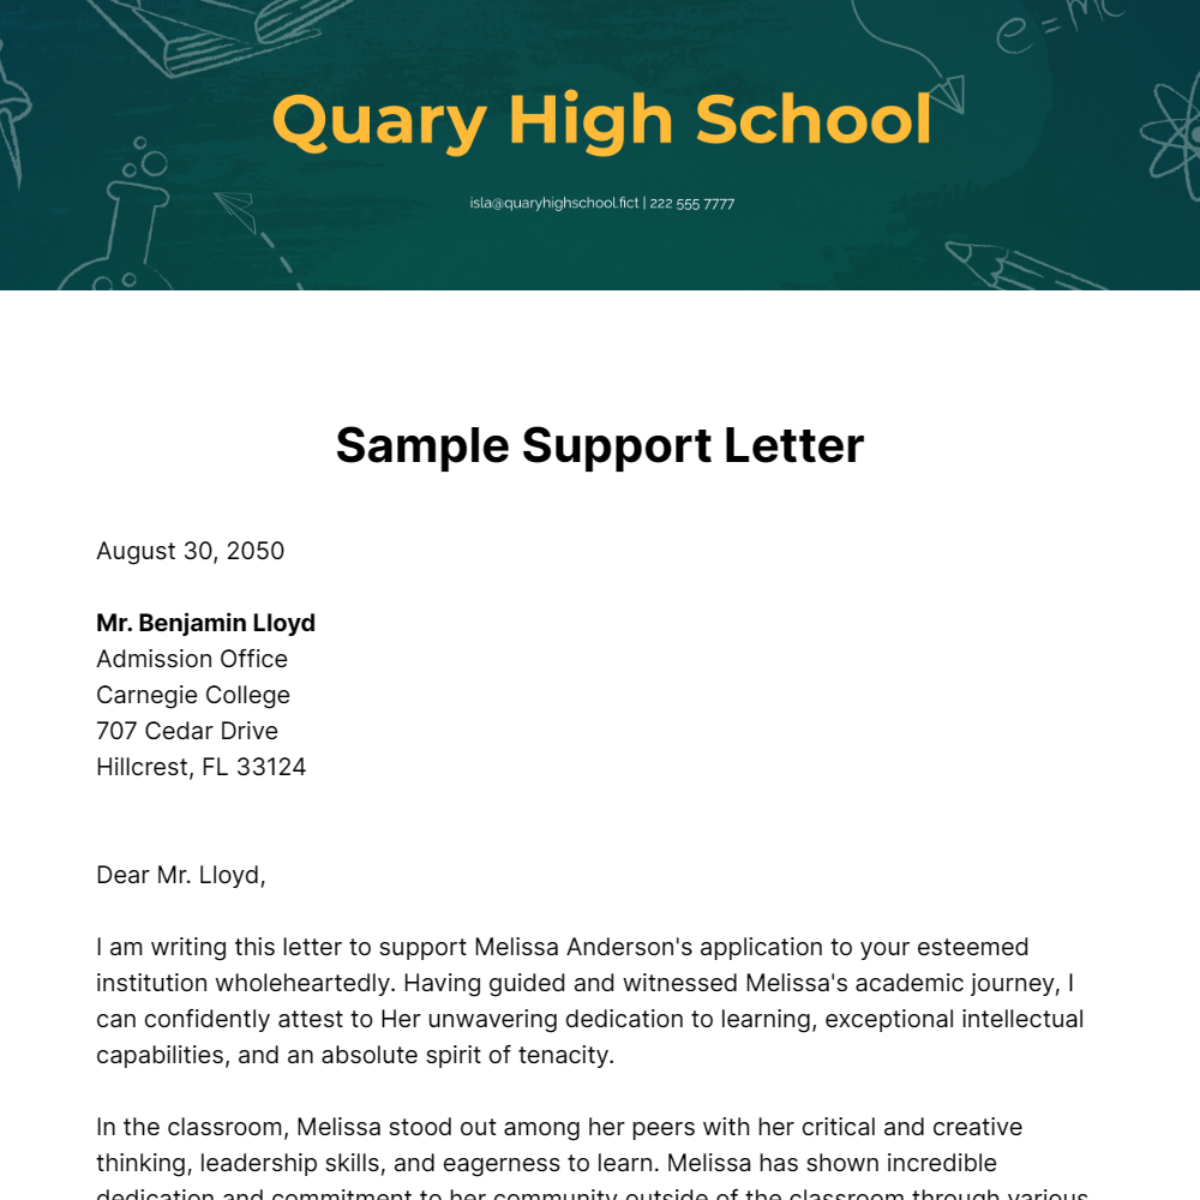 Sample Support Letter Template